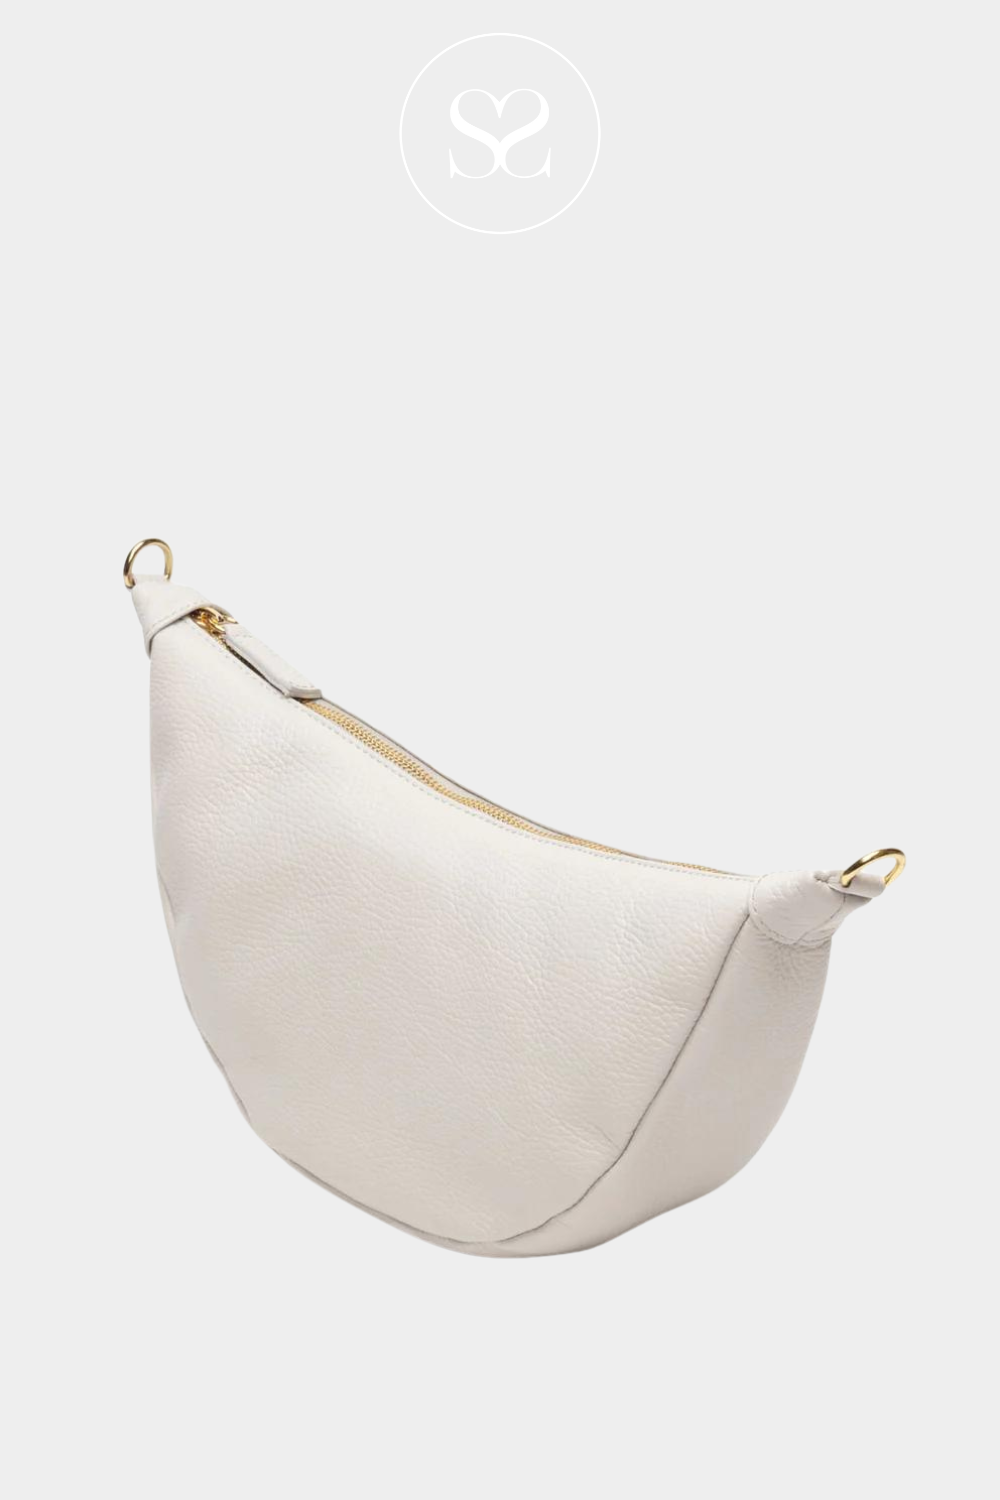 elie beaumont bumbag in Ivory leather